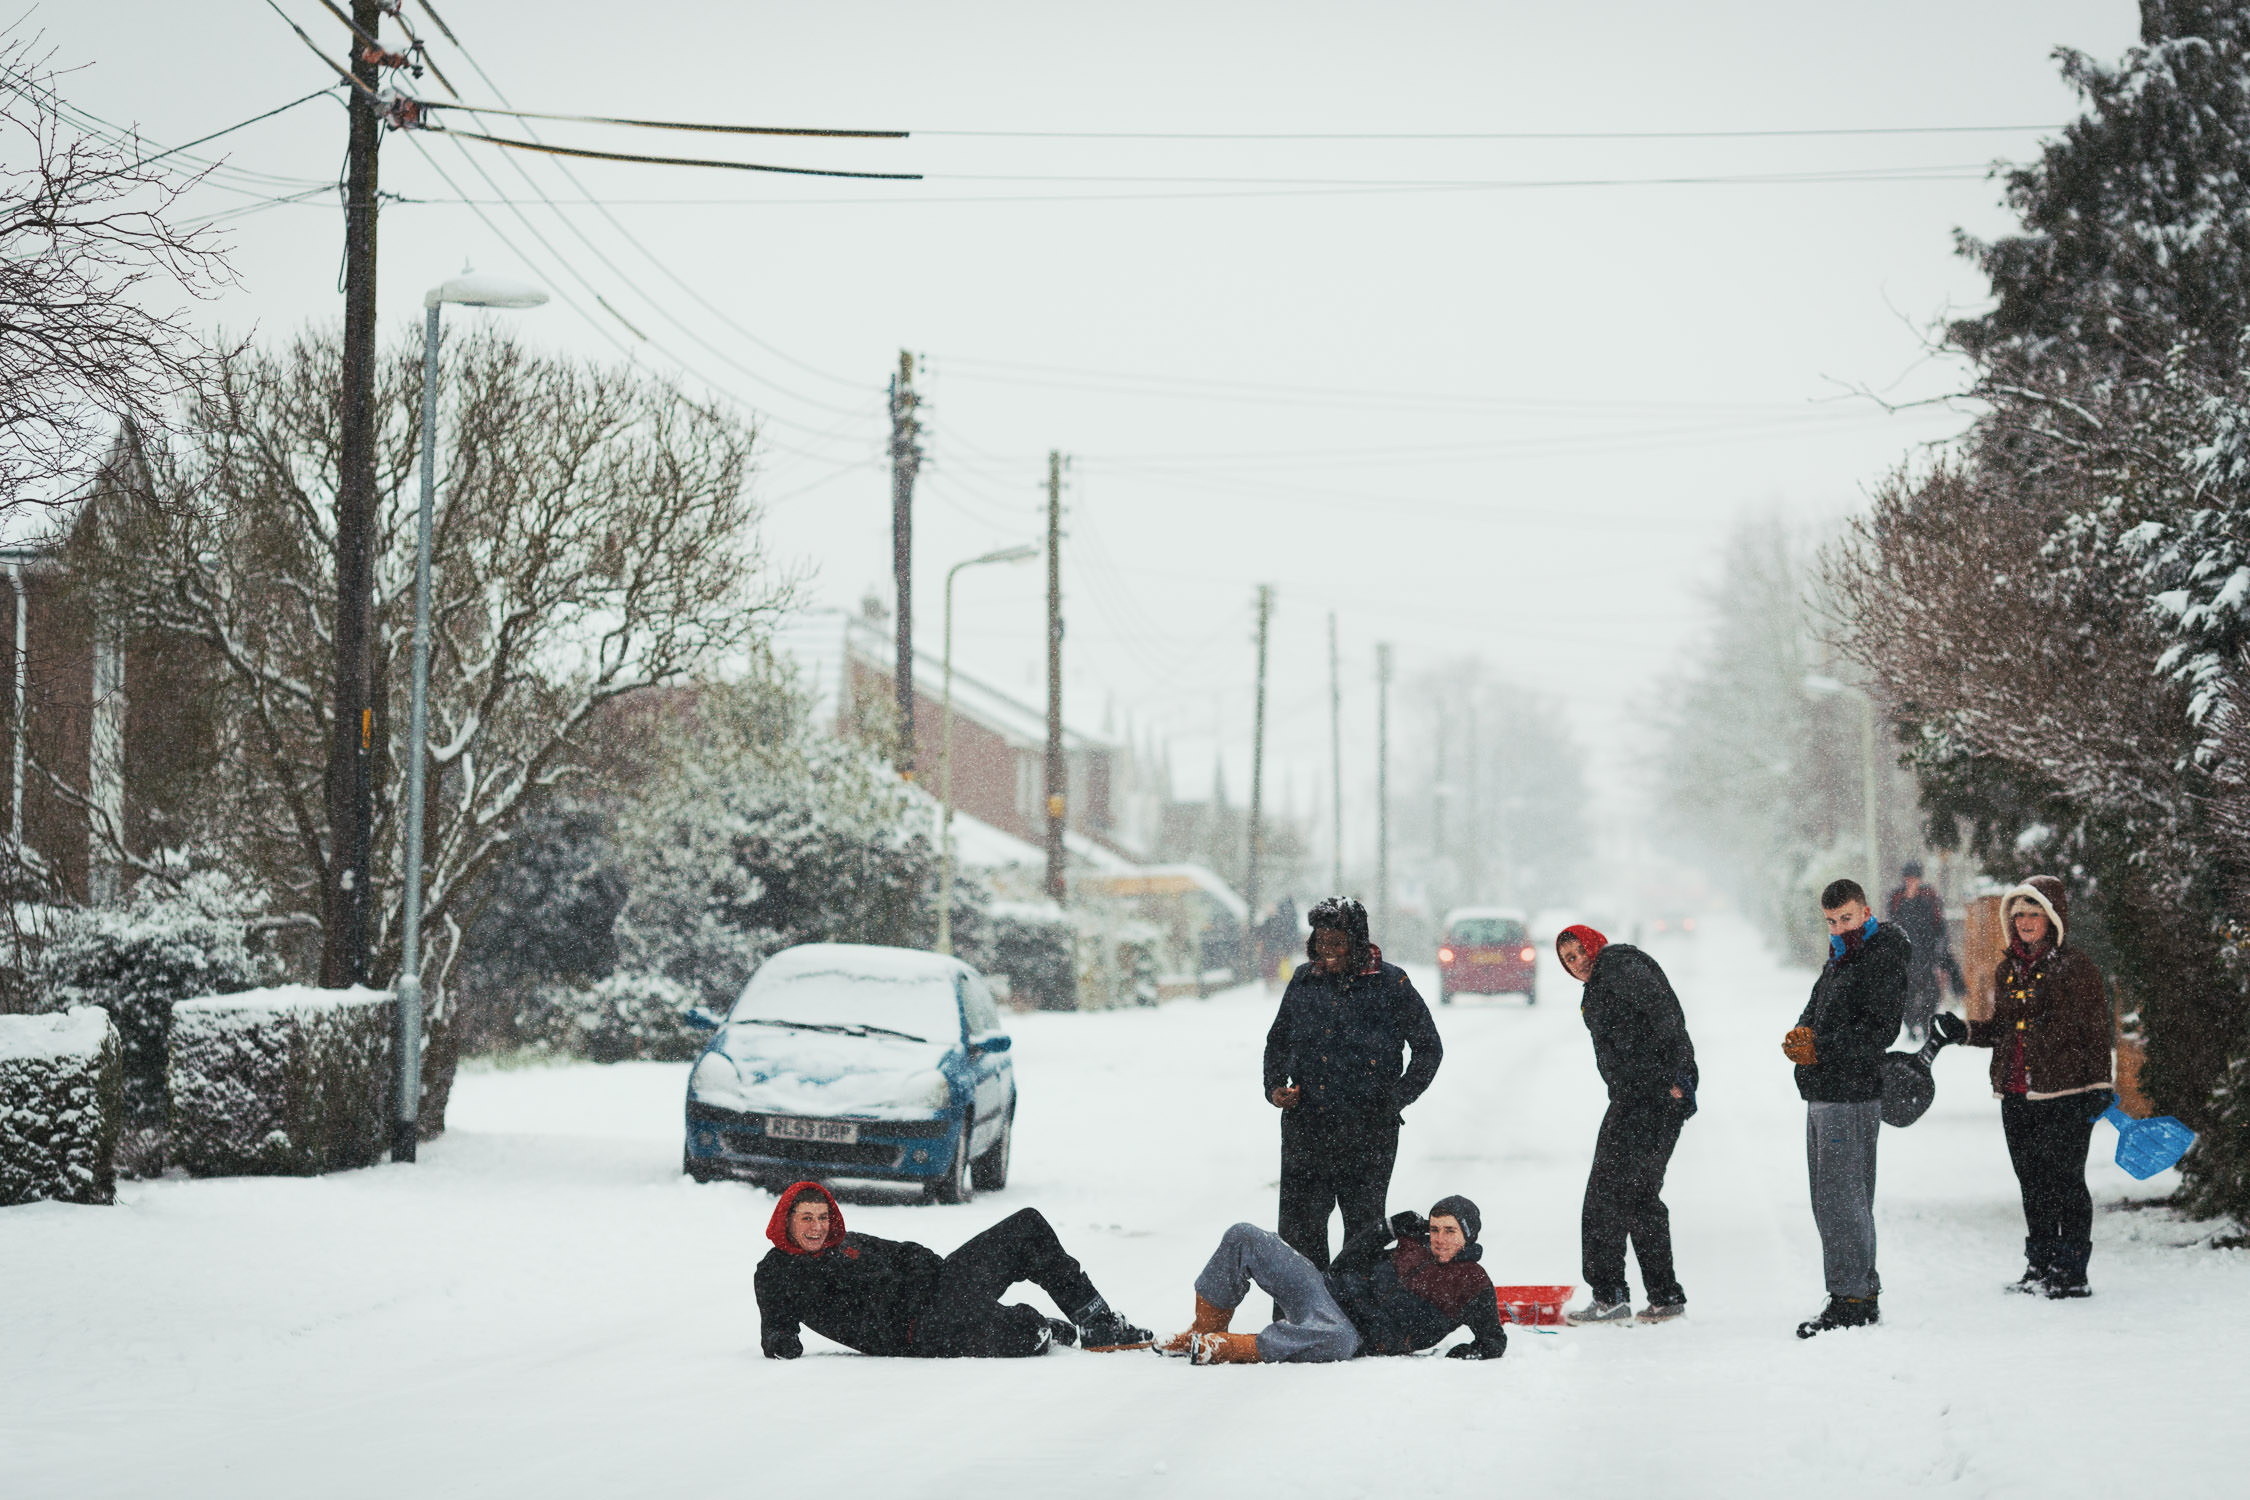 Young people in the middle of the road in the snow. King Edward's Road in South Woodham Ferrers near Chelmsford.